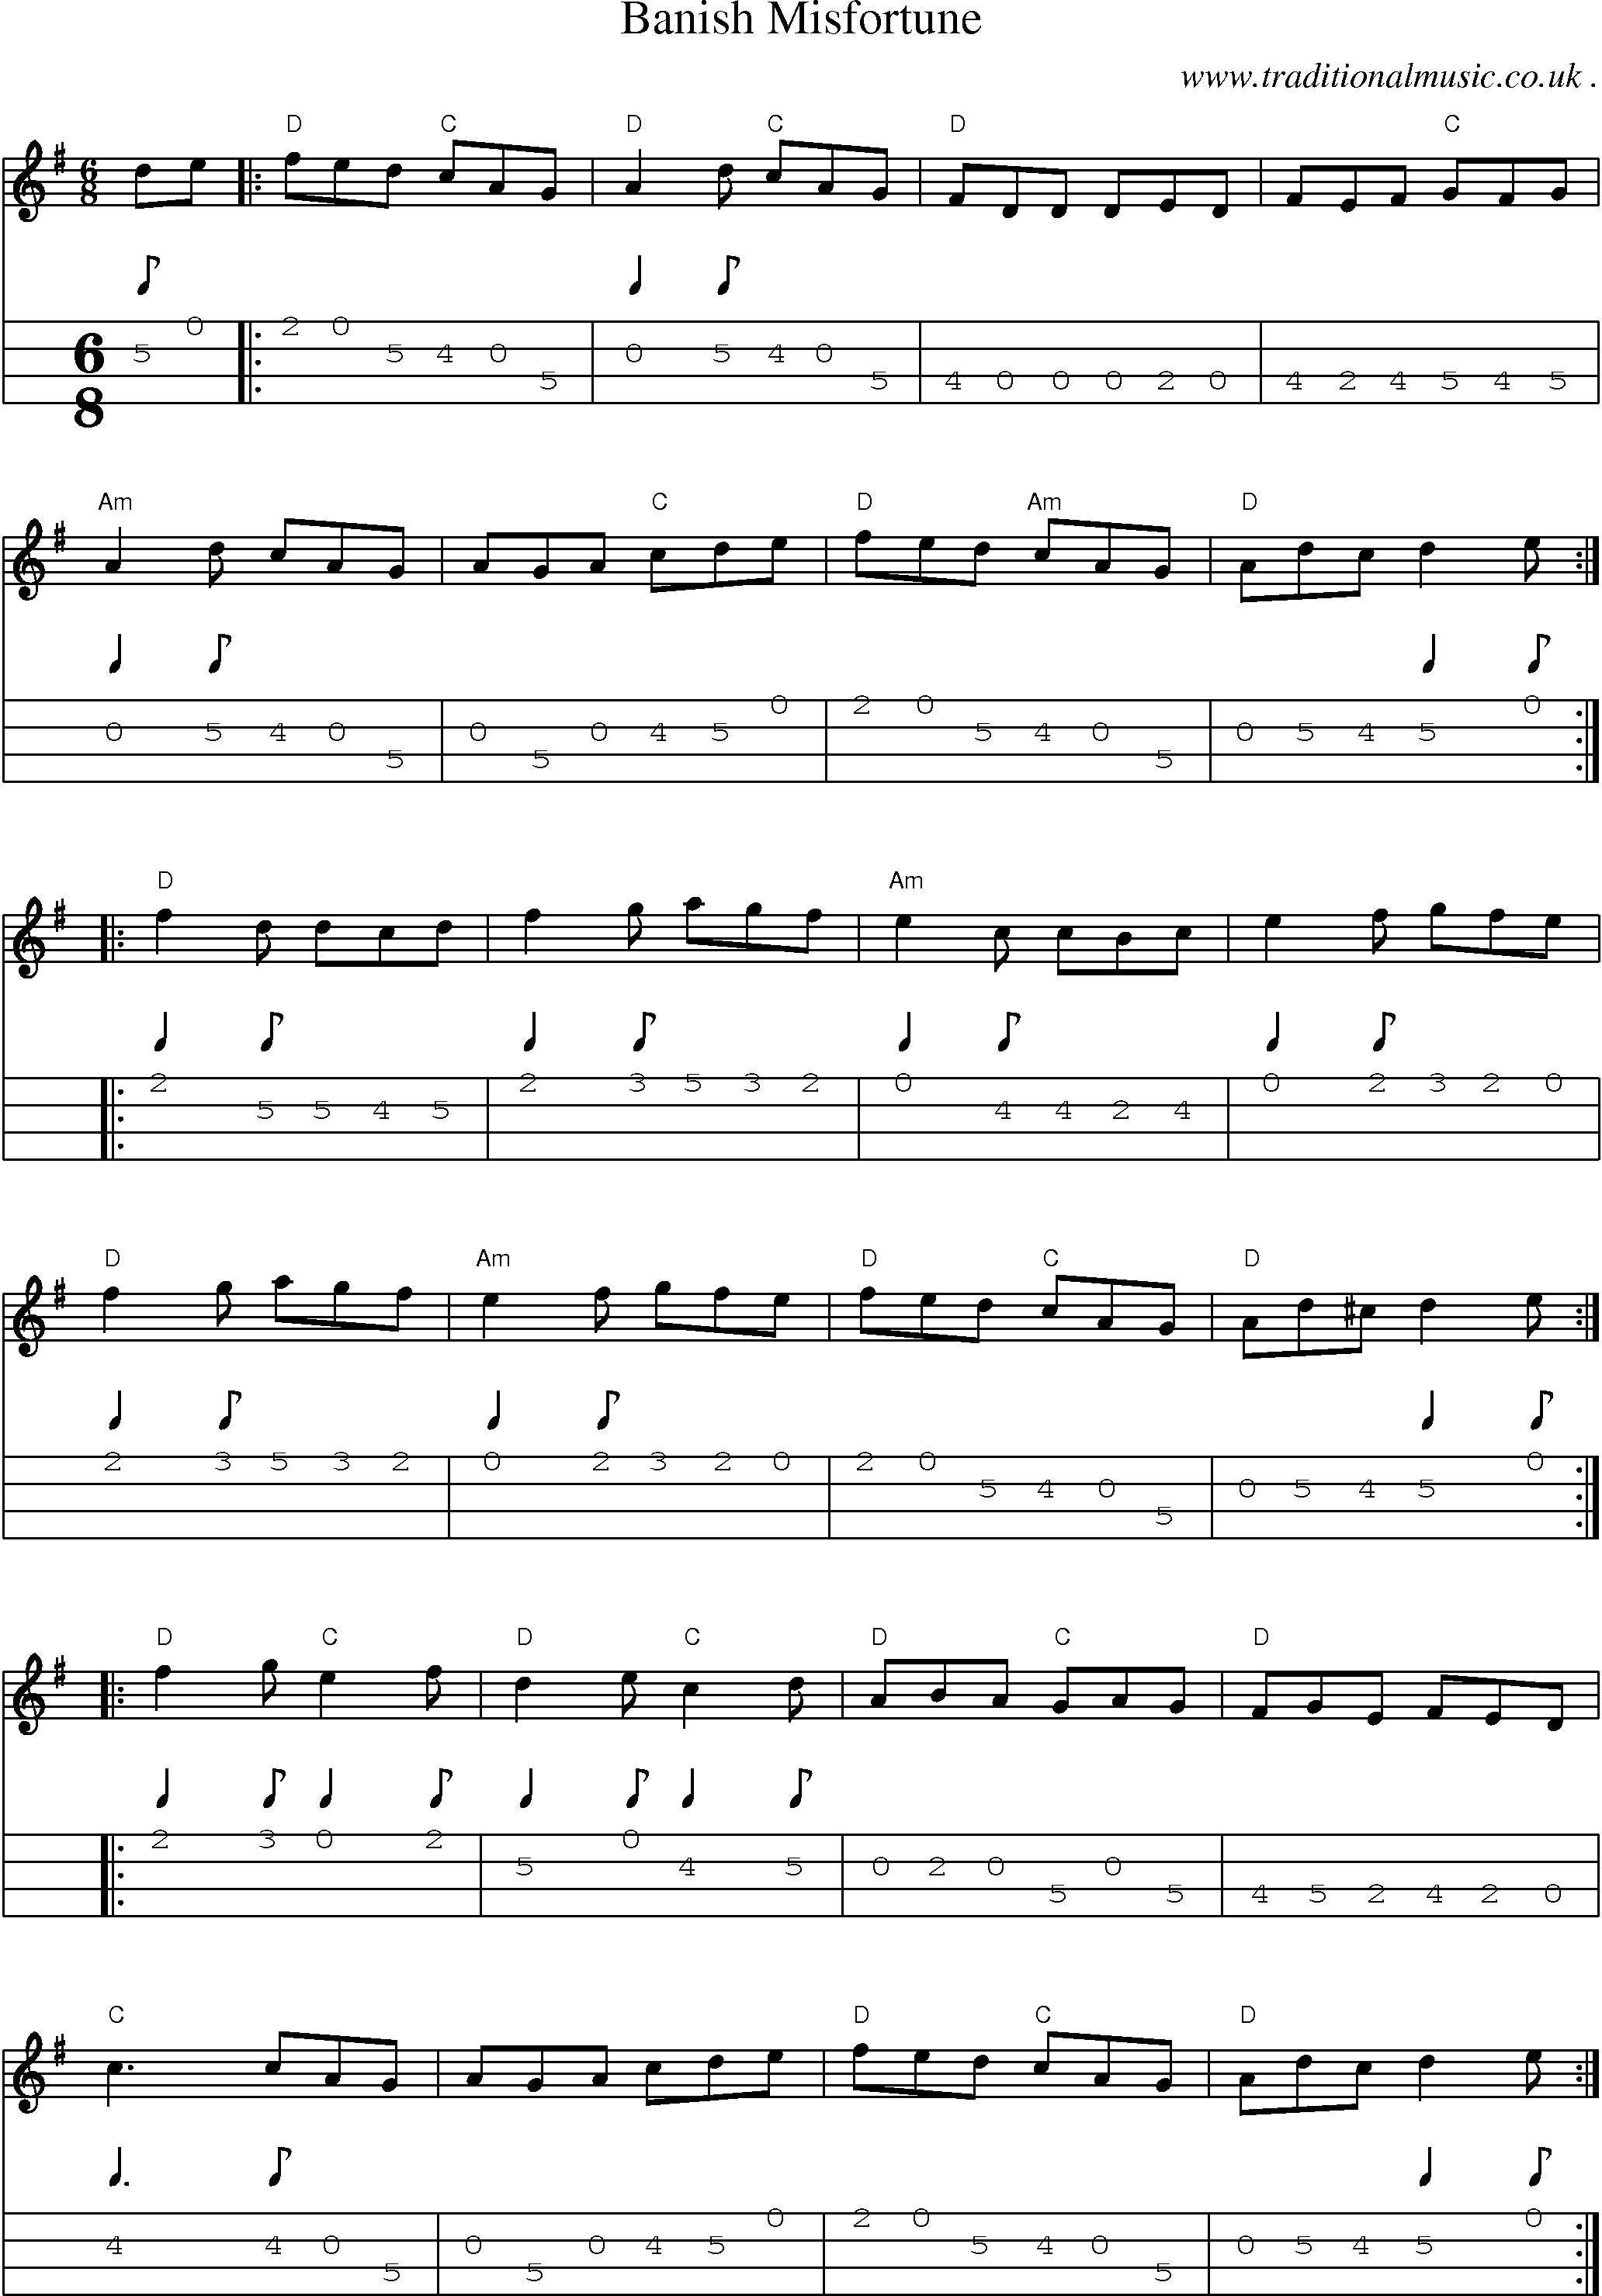 Music Score and Guitar Tabs for Banish Misfortune